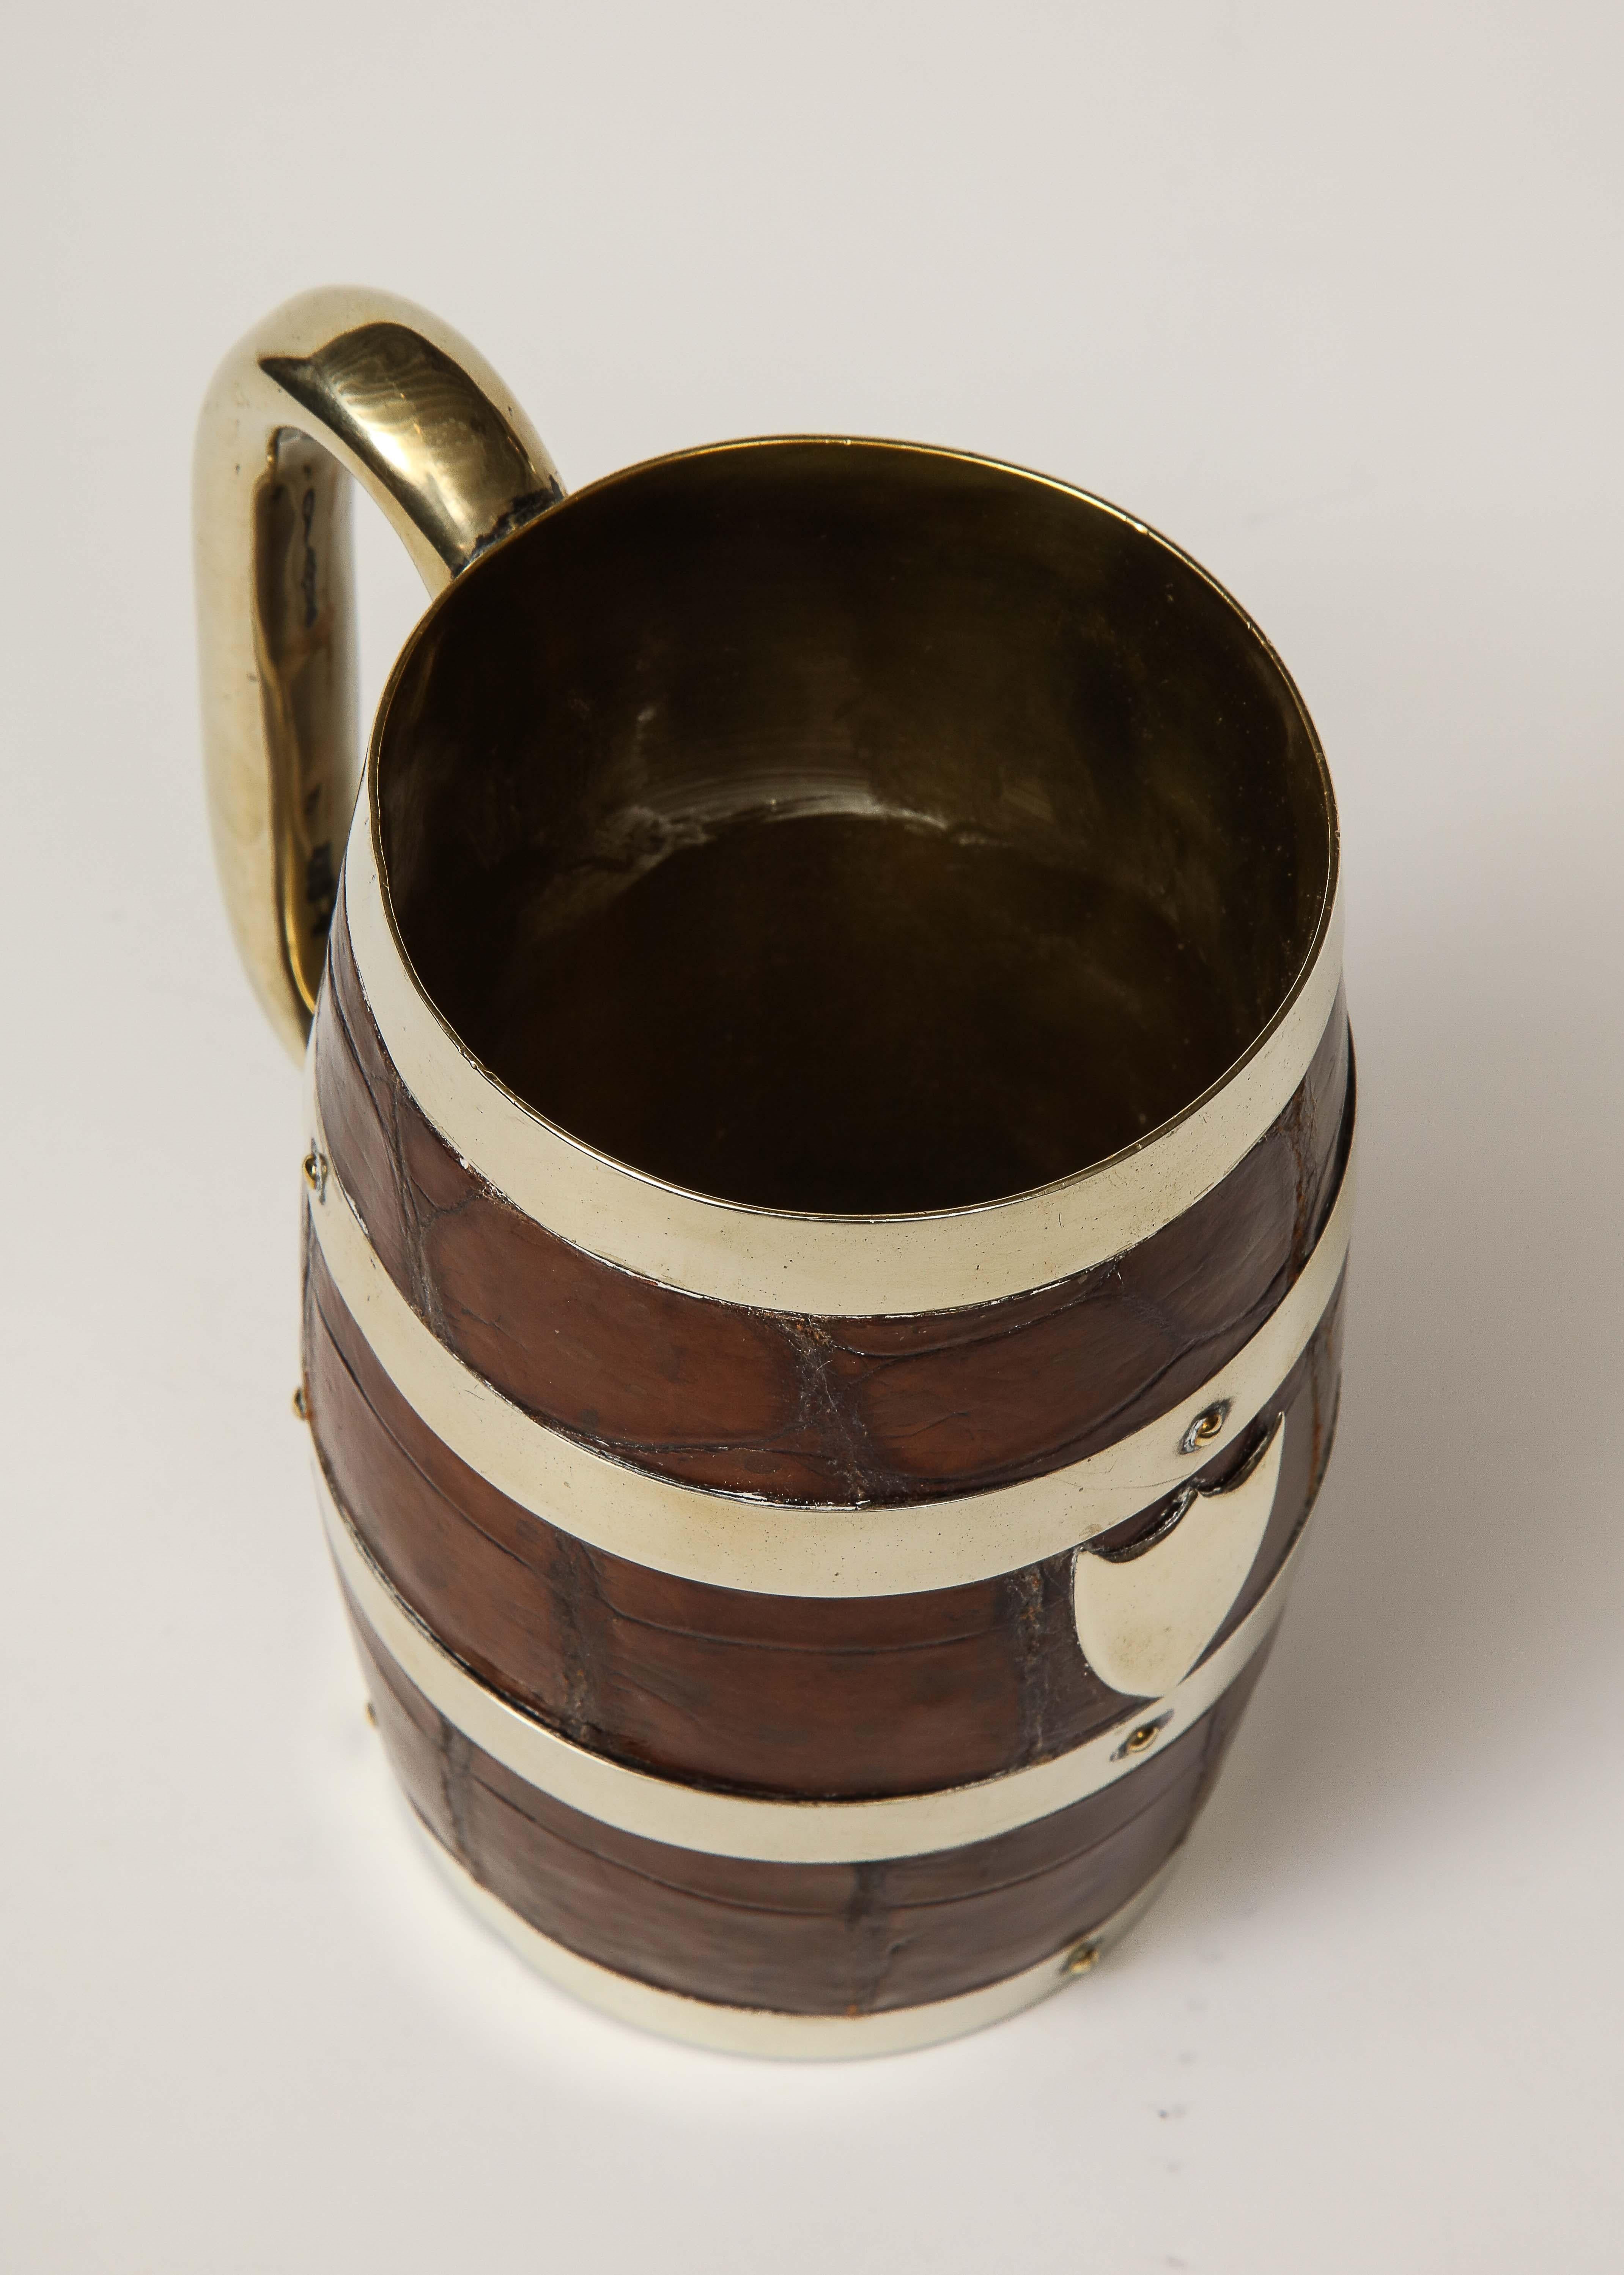 English Late 19th Century Alligator Covered Mug with Silver Mounts For Sale 7